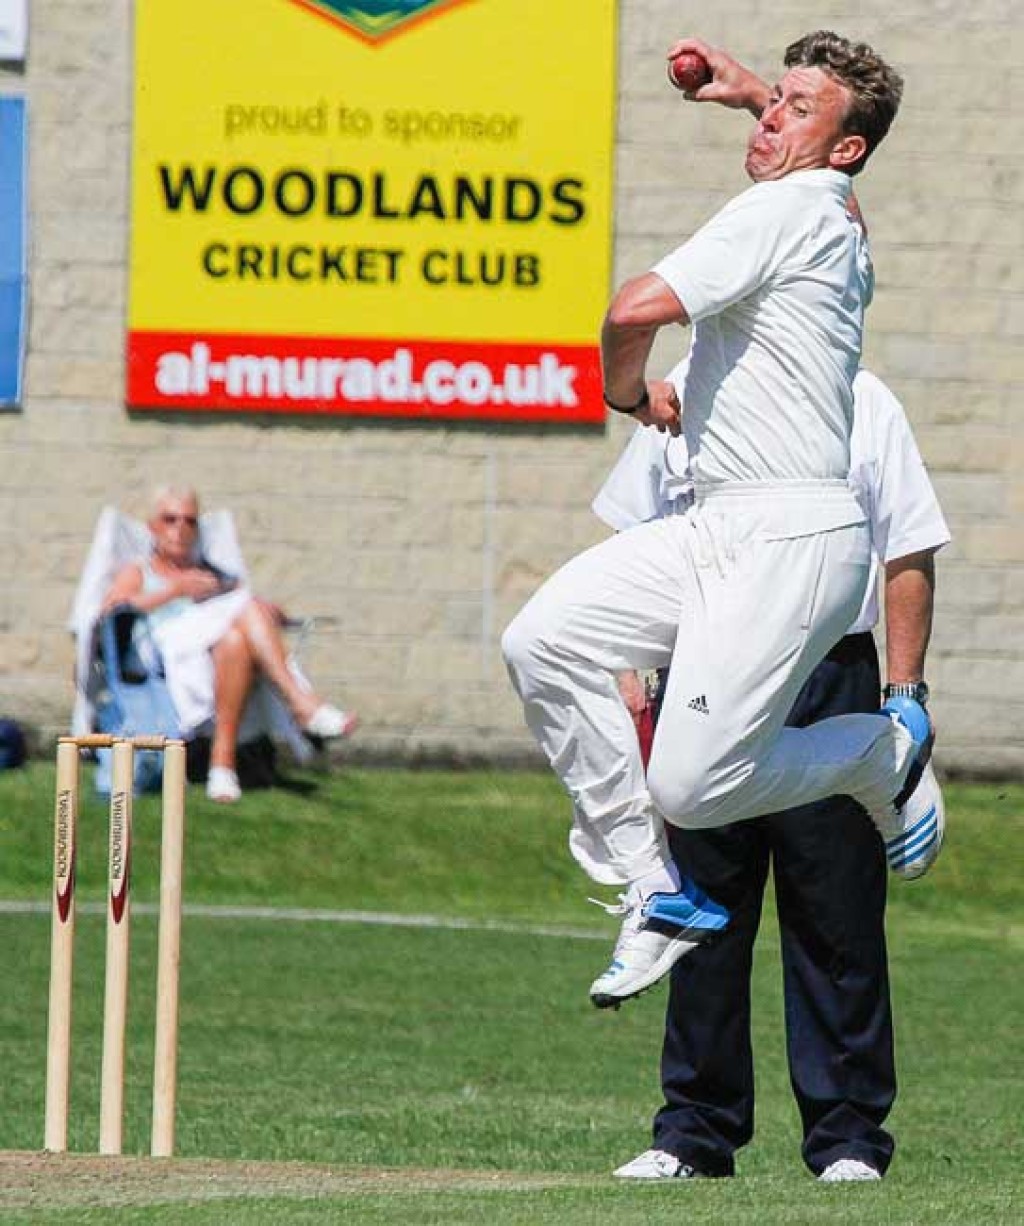 2005: Title wins for Woodlands, Townville and Rodley